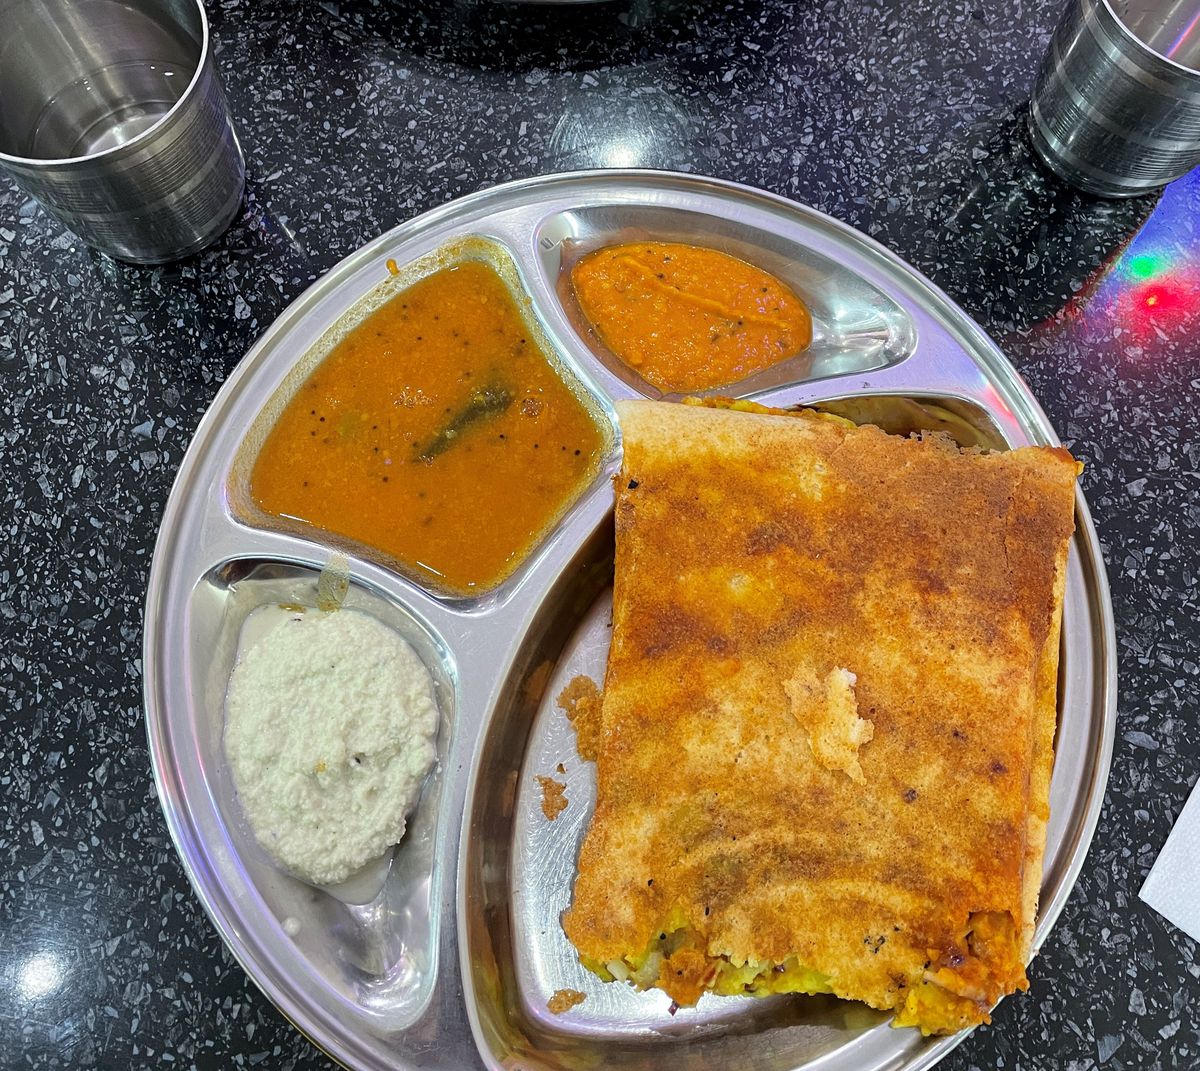 A silver tray with a masala dosa, two orange chutneys, and one sploosh of yoghurt, each in their own compartments.